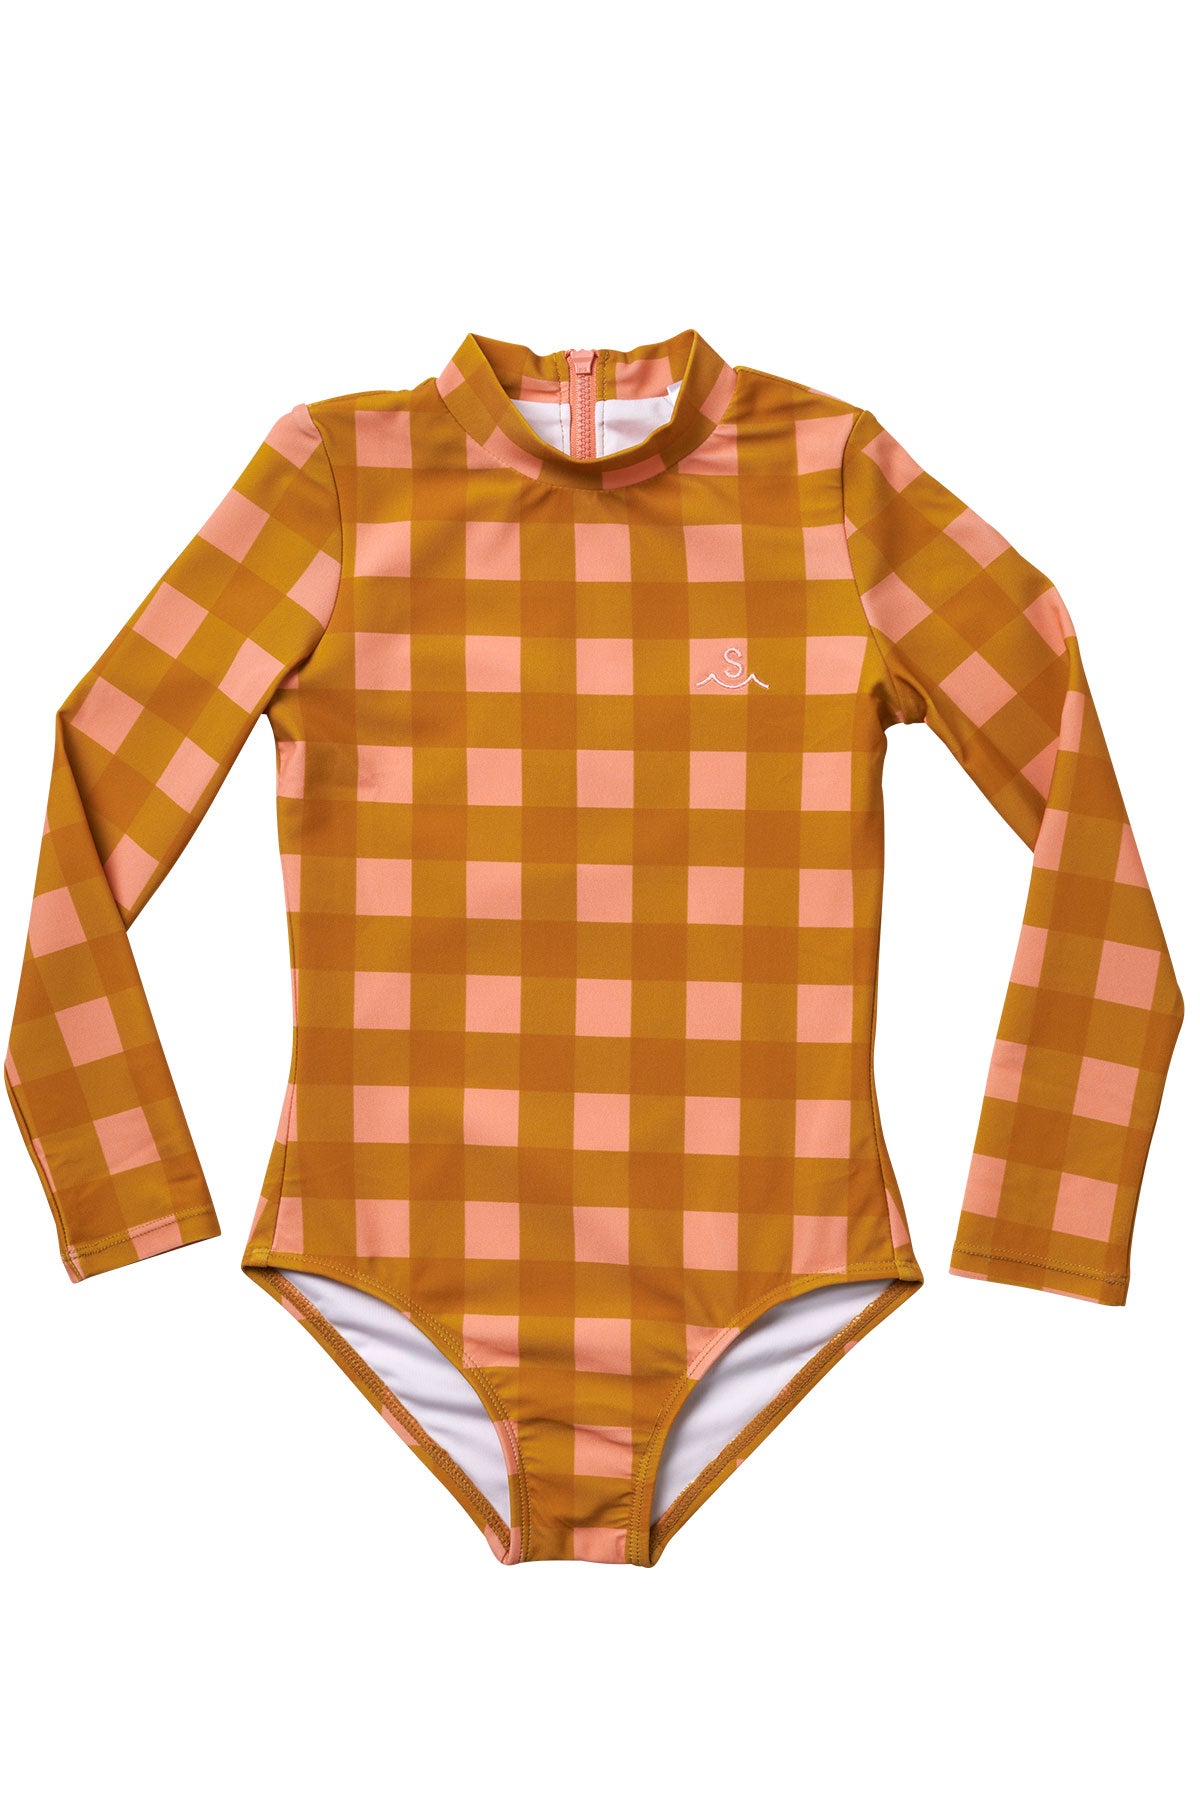 Surf Long Sleeve One-Piece Swimsuit in Nautical Awning